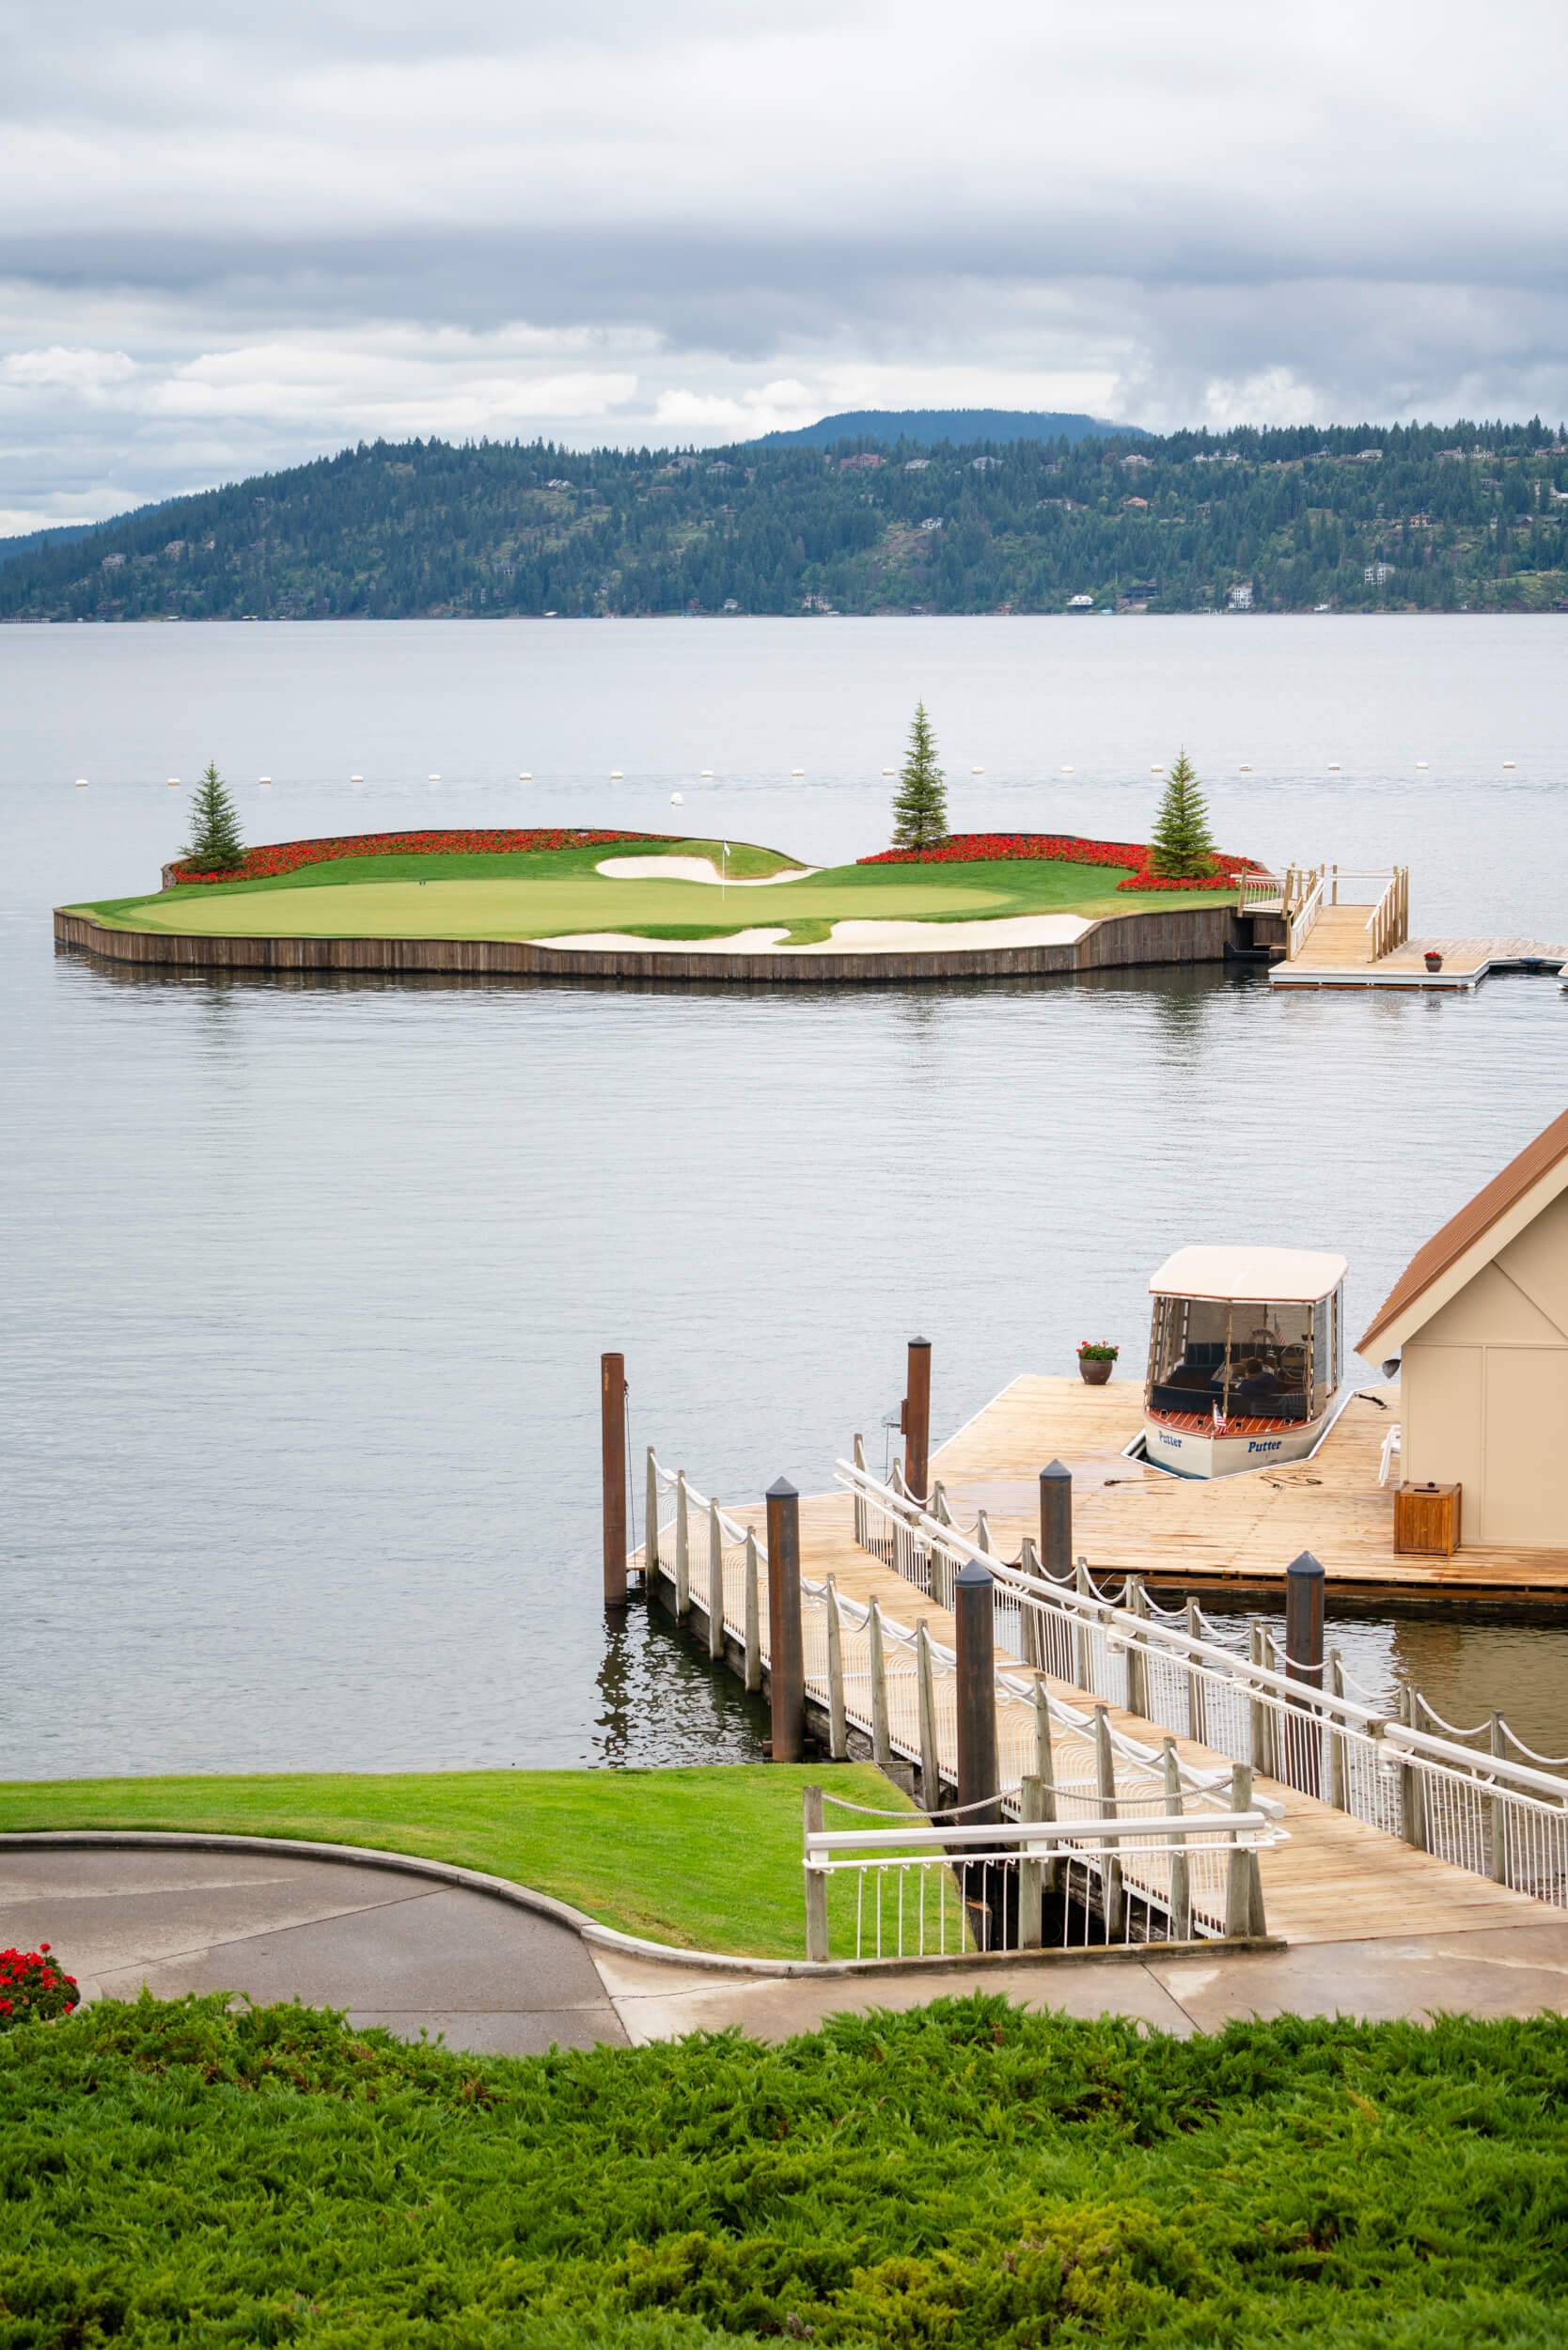 a small portion of a golf course floats in a lake